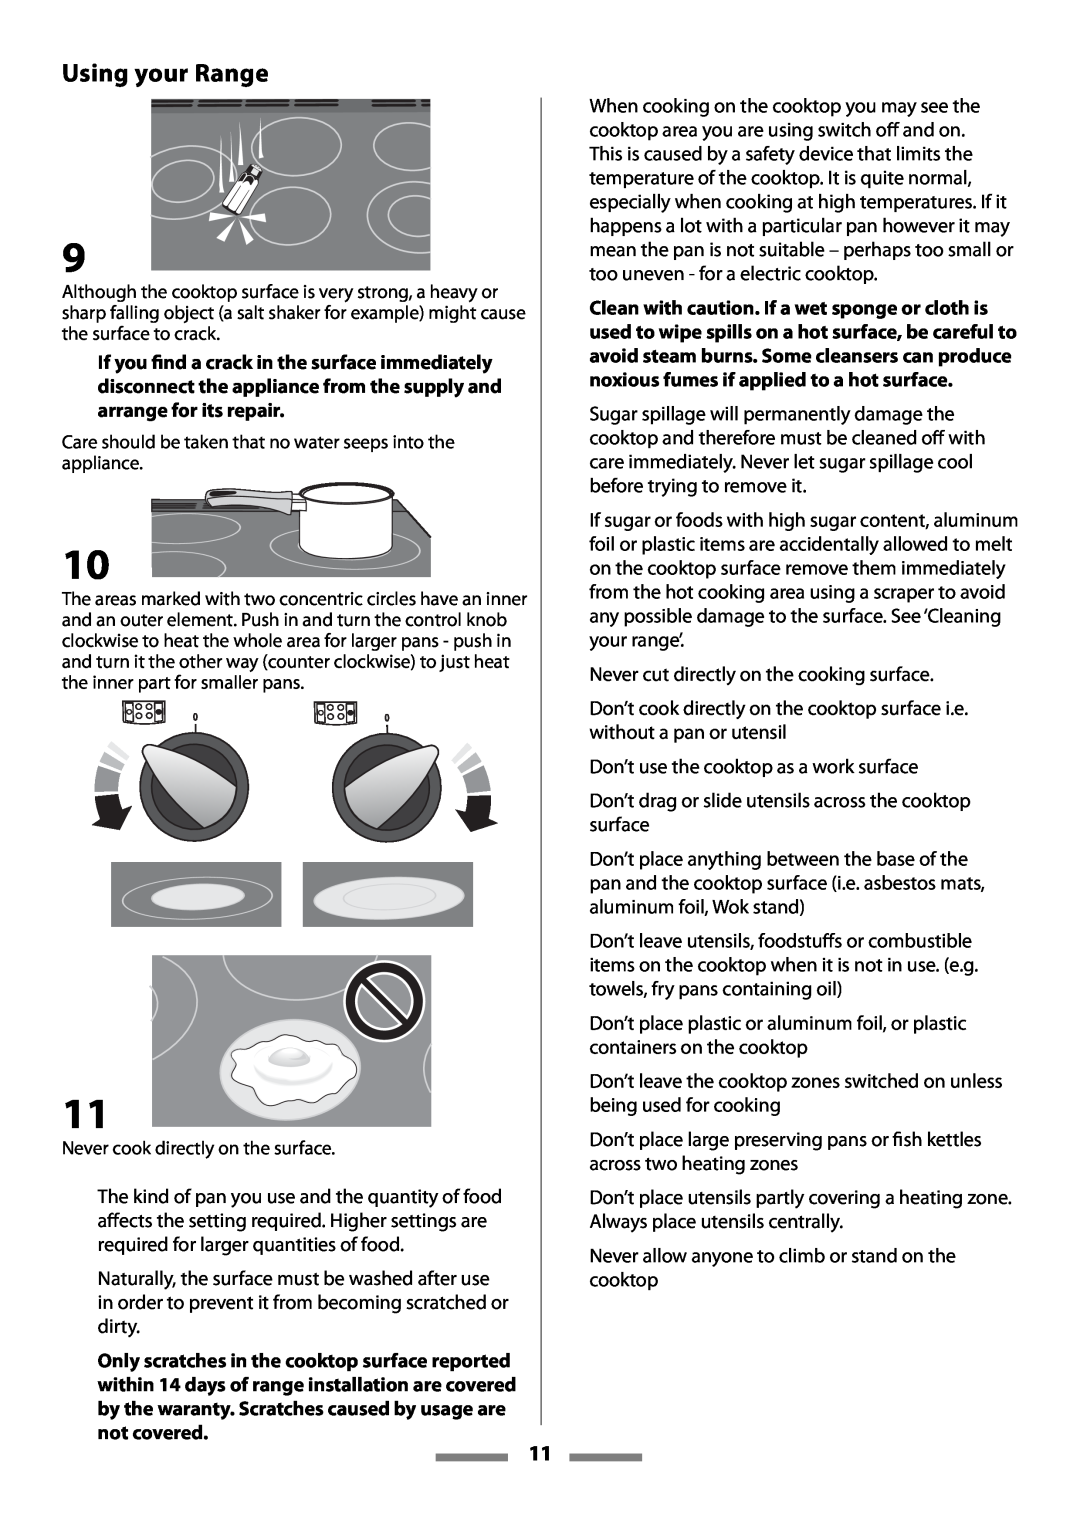 Aga Ranges Legacy 44 installation instructions Using your Range, Never cut directly on the cooking surface 